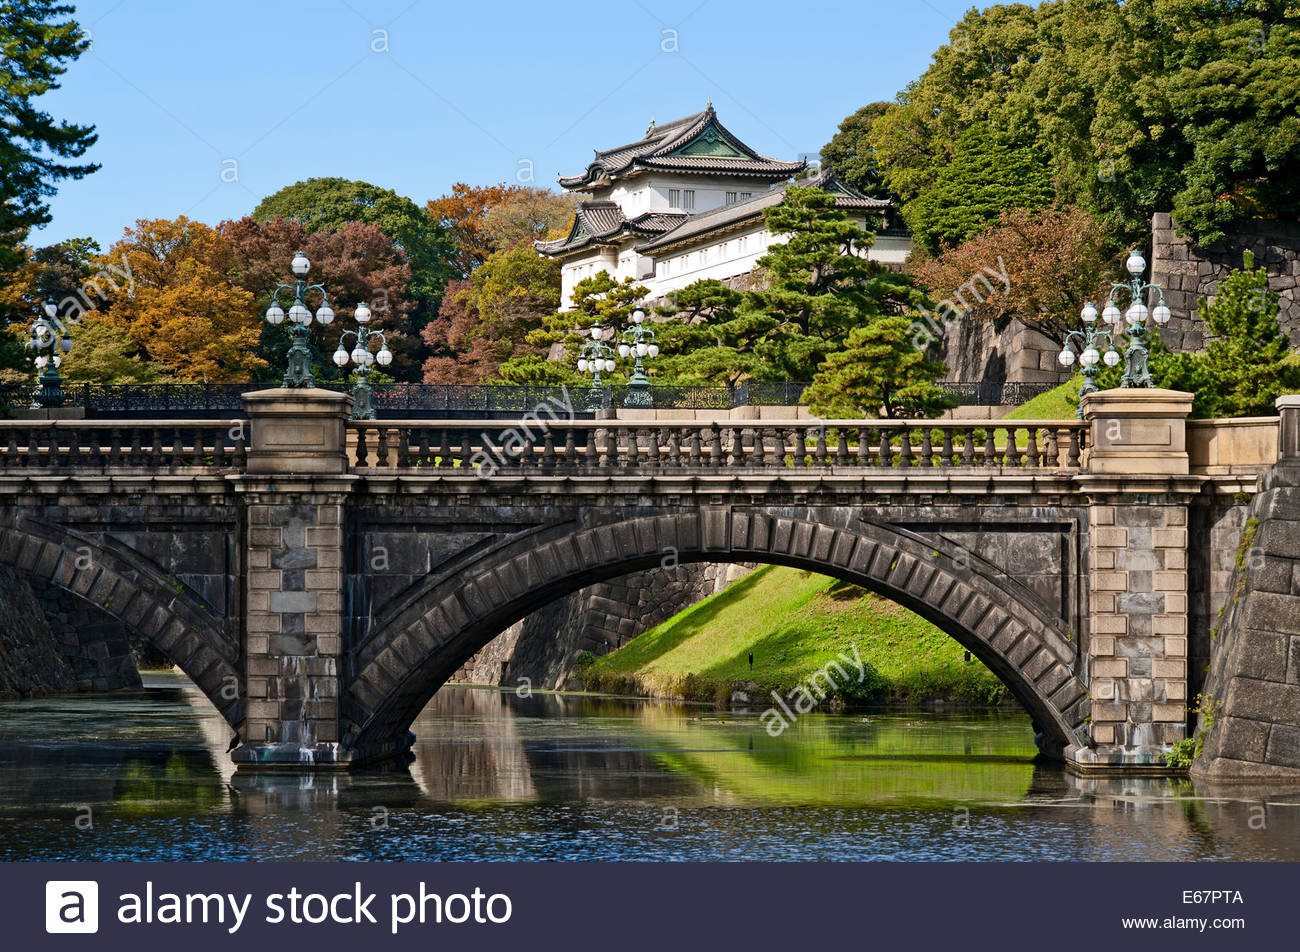 High Resolution Wallpaper | Tokyo Imperial Palace 1300x952 px